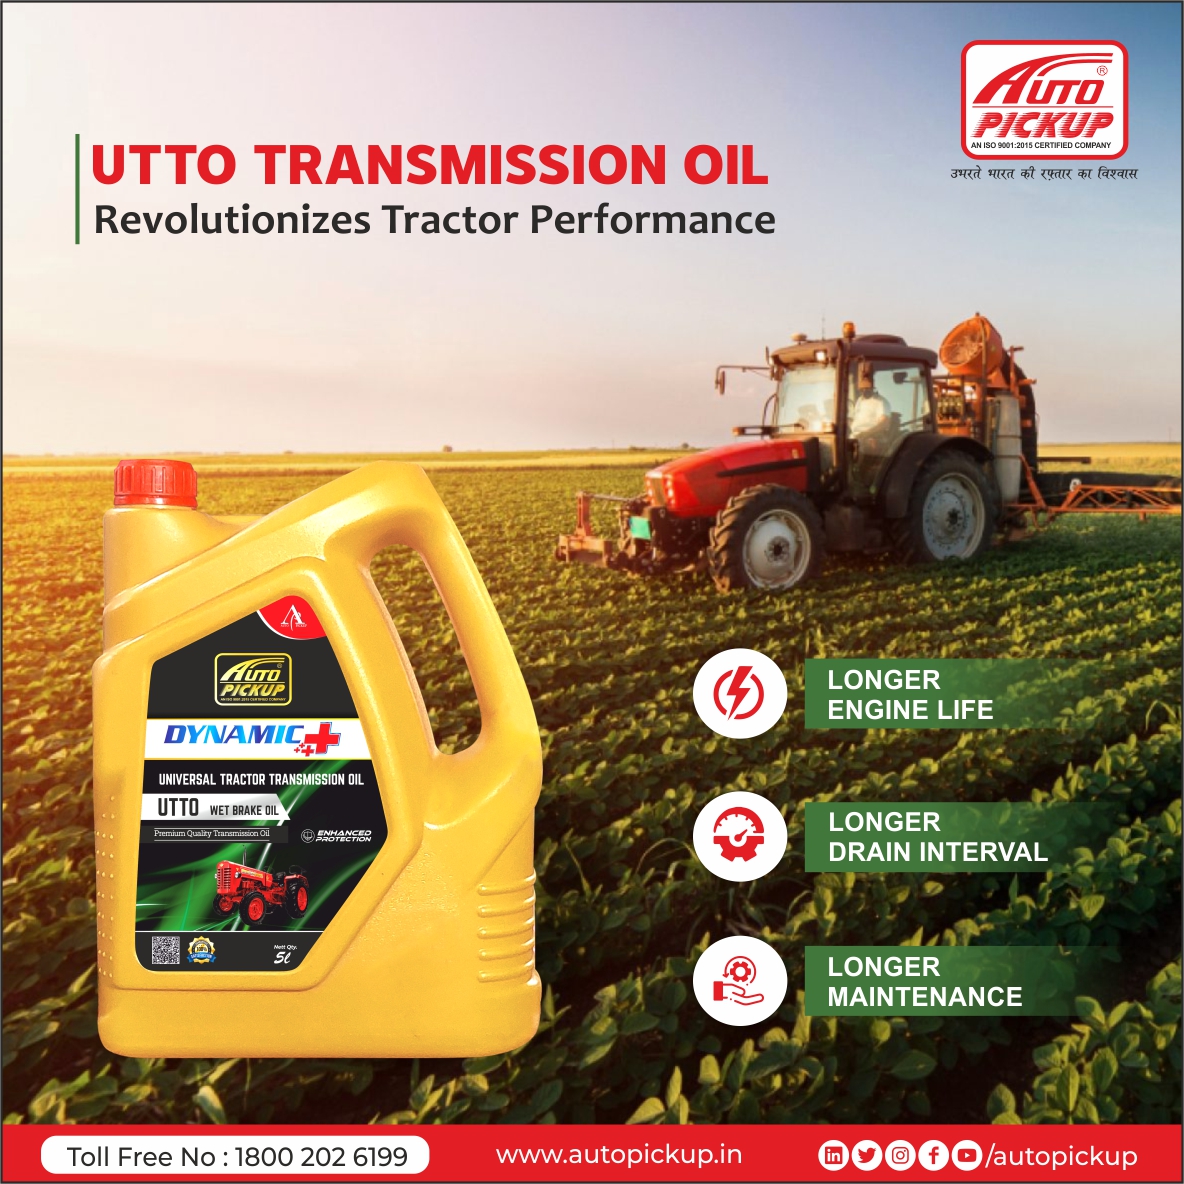 Revolutionize your driving experience with Auto Pickup UTTO Wet Brake Oil!

📞18002026199 
📲 wa.link/xekgd0
🌐 autopickup.in

#AutoPickup #UTTO #WetBrakeOil #PerformanceDriven #DriveWithConfidence #WetBrakeOil #PerformanceBoost #SmoothShifts #BrakePerformance